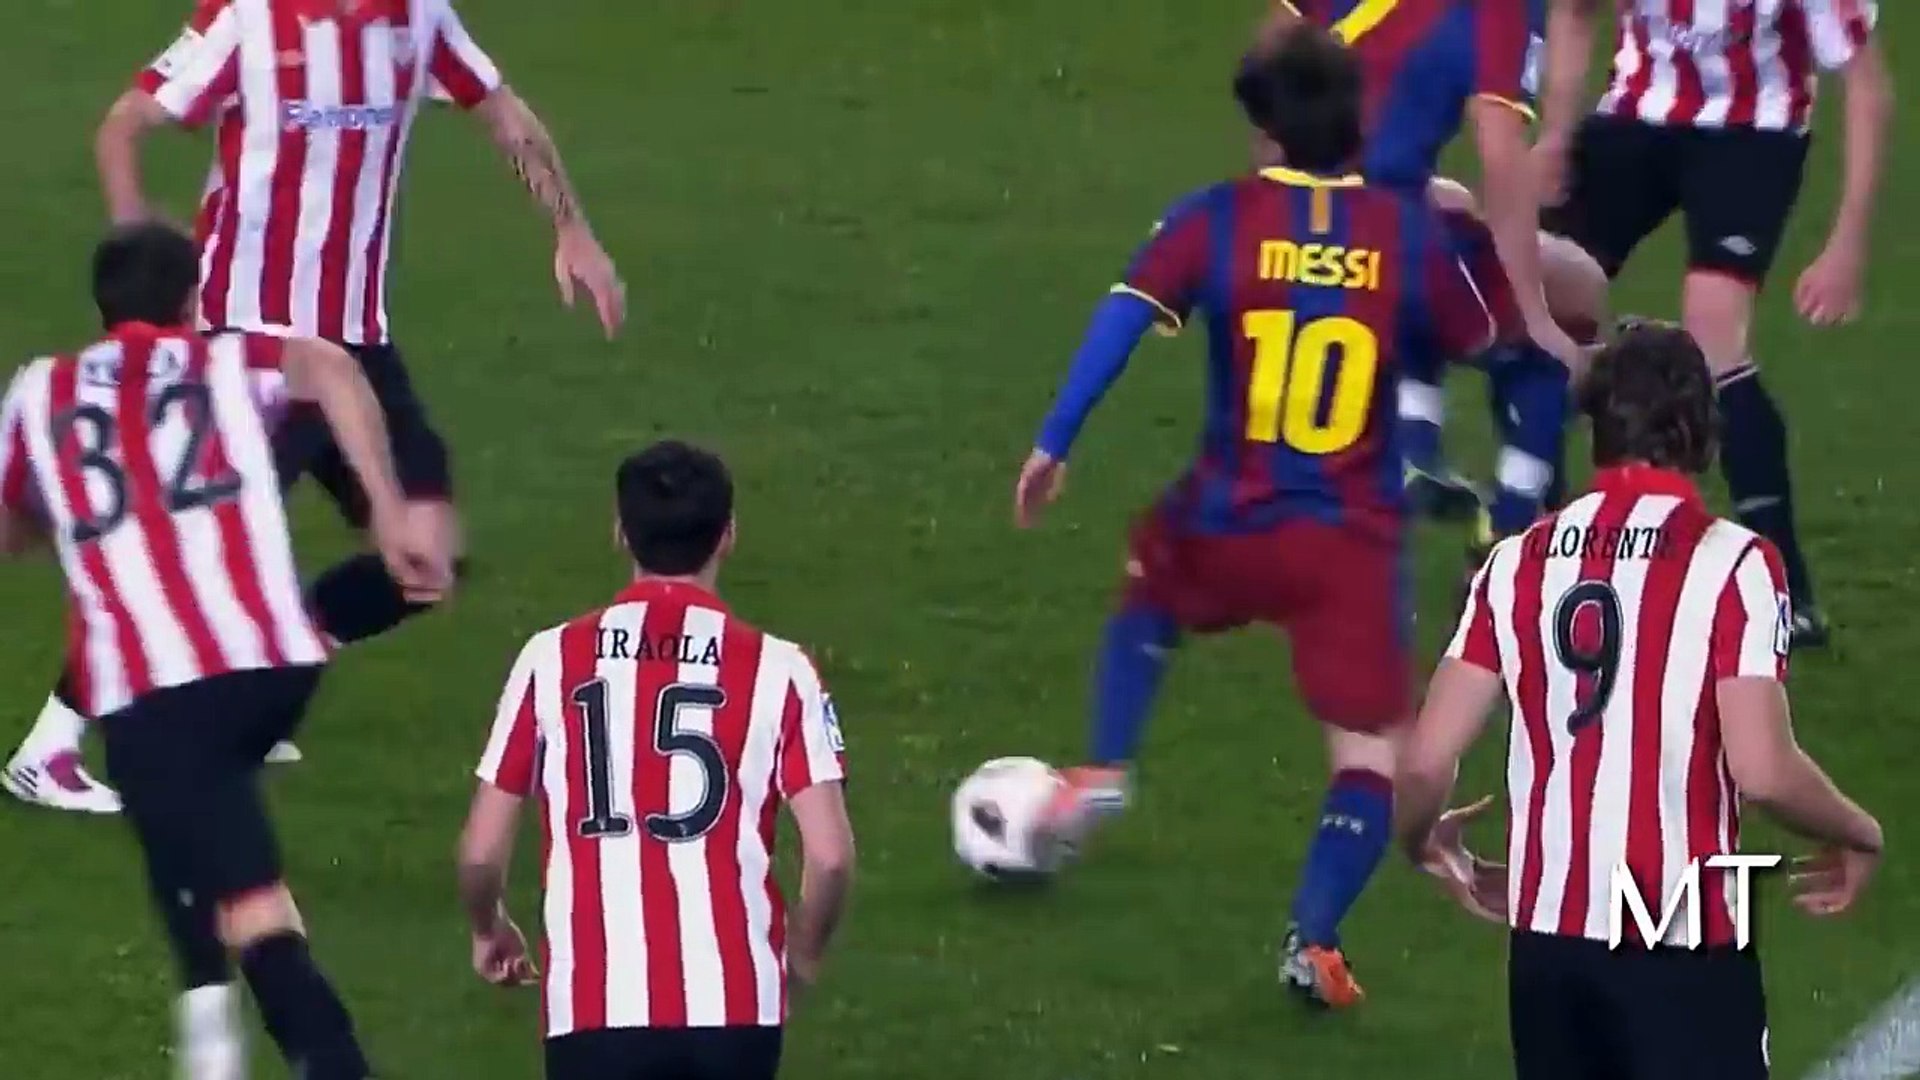 Lionel messi games dribbling was insanity